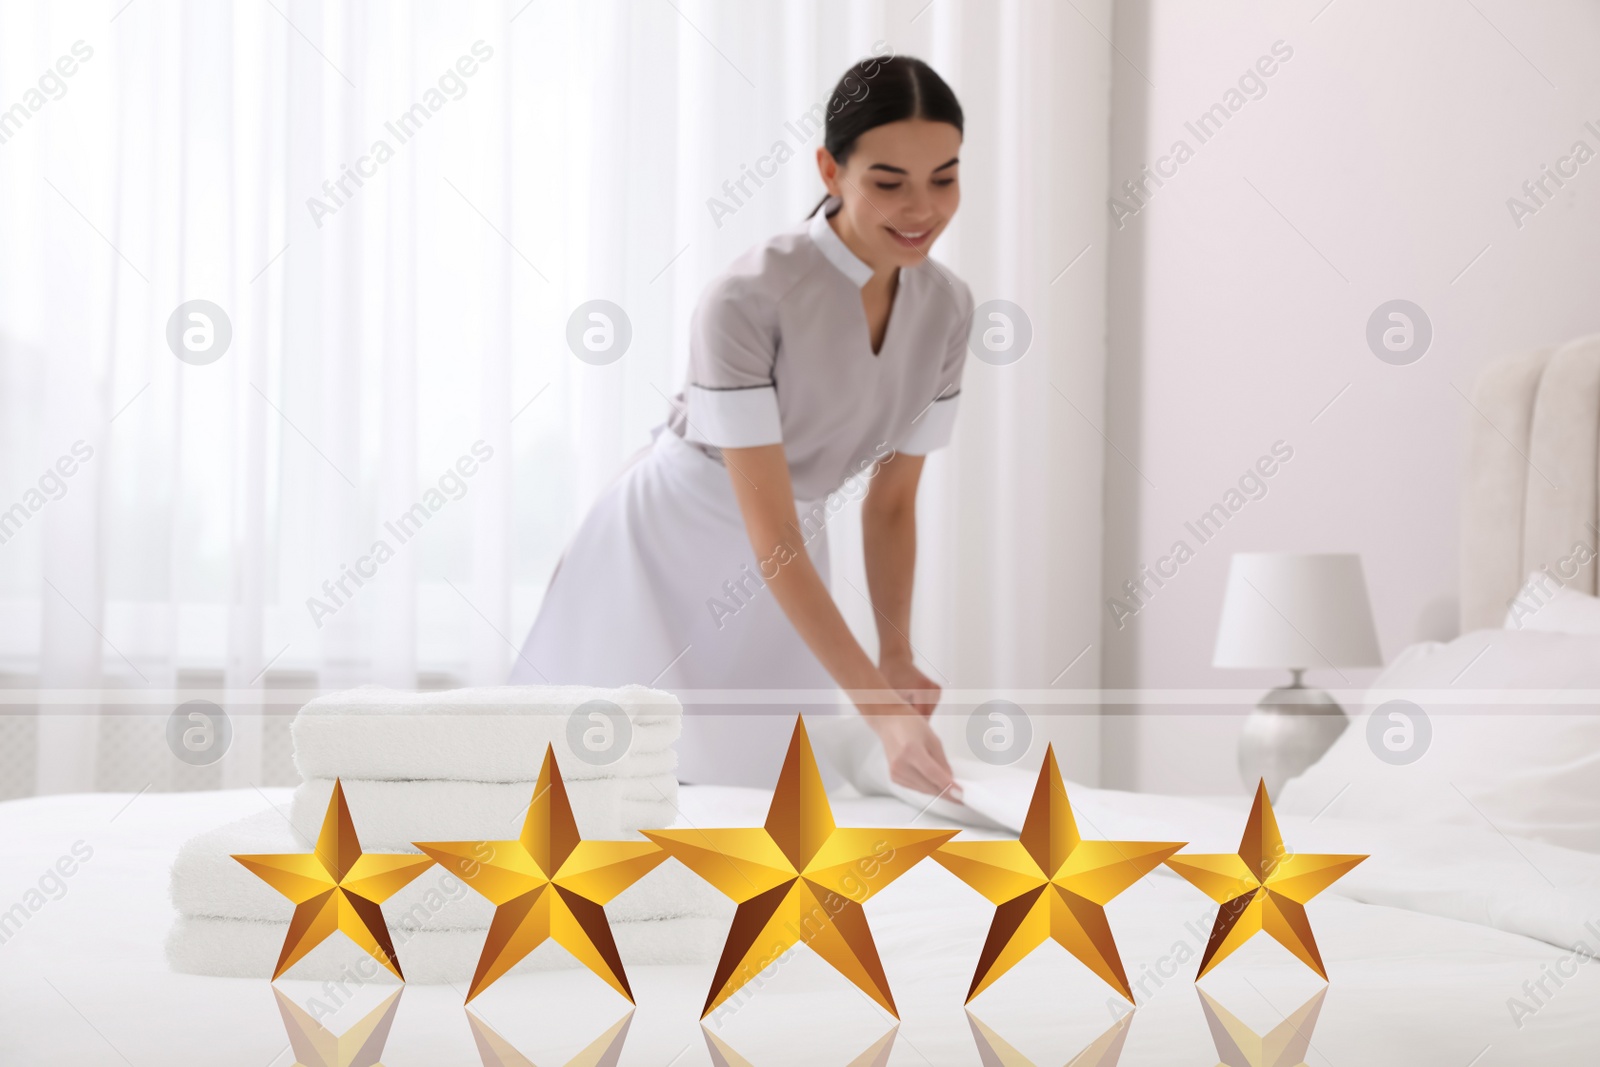 Image of Chambermaid making bed in five star hotel room